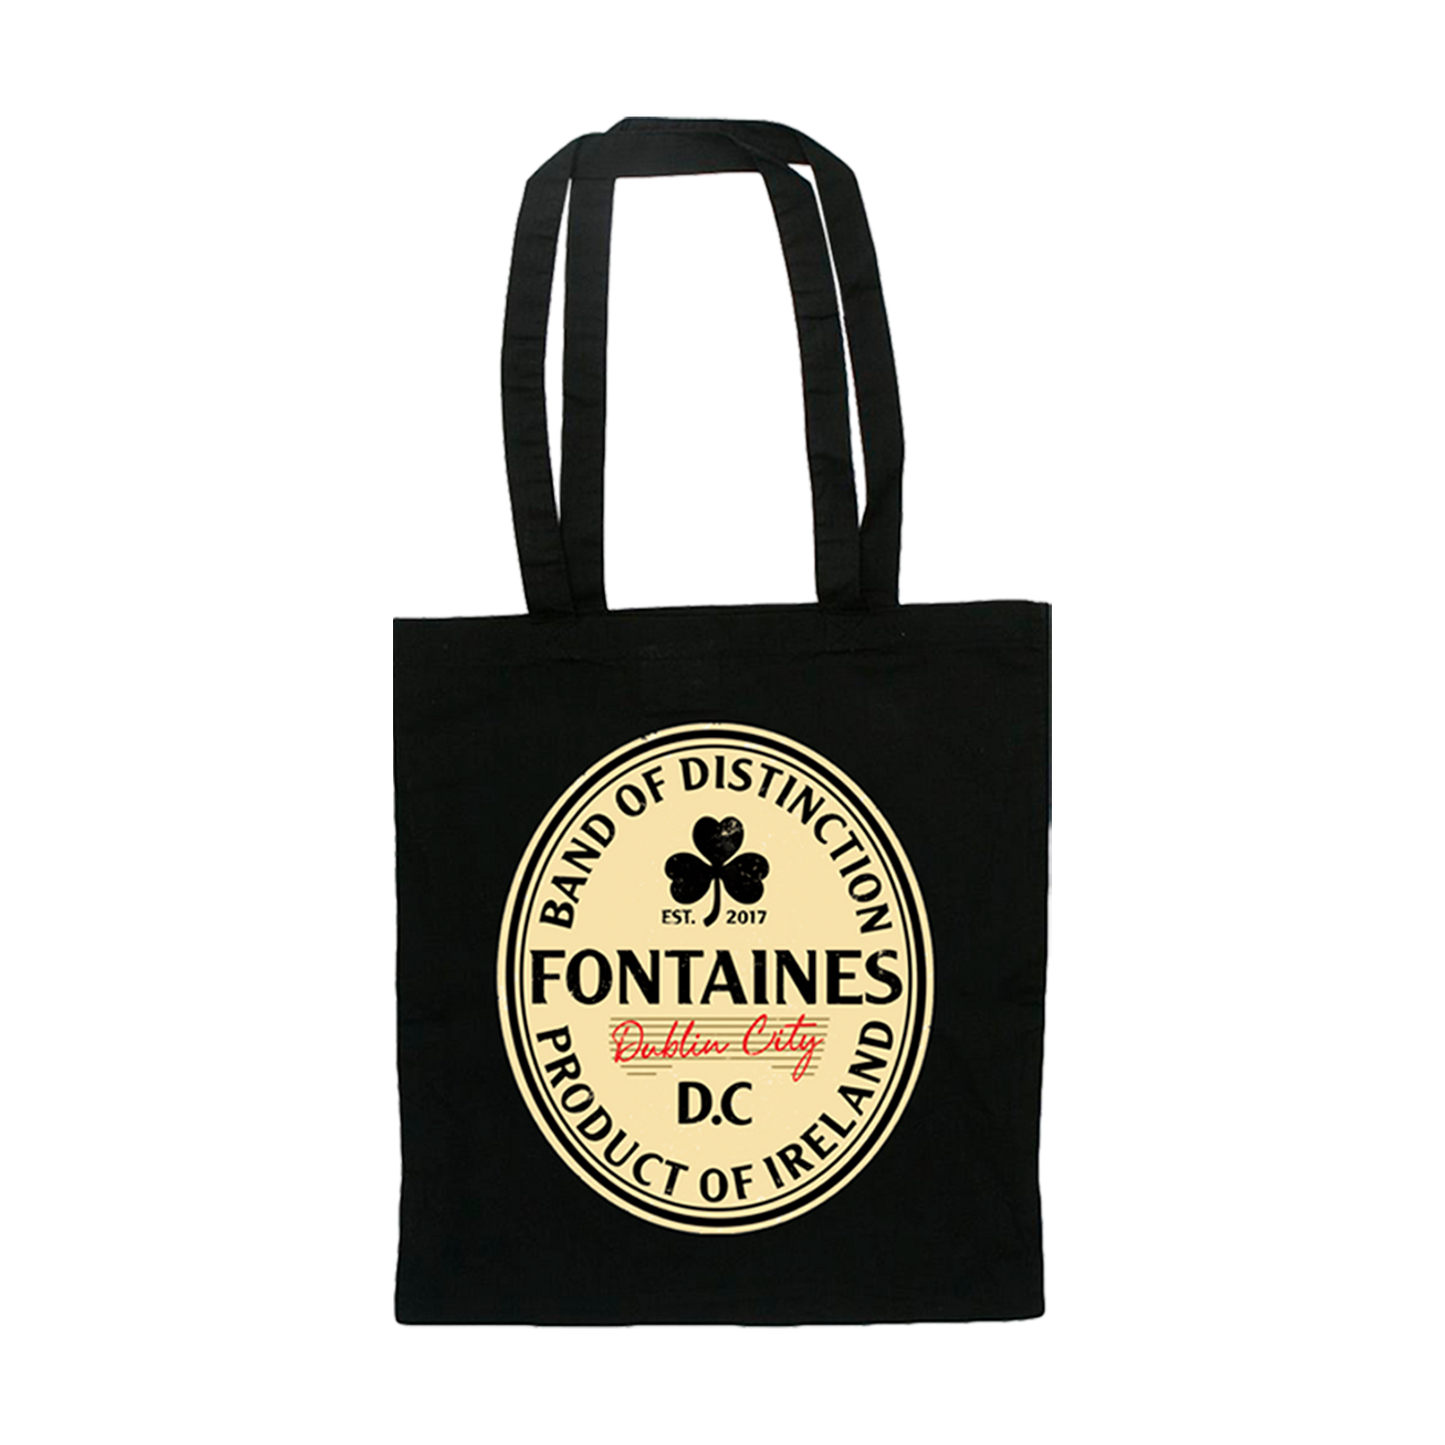 BAND OF DISTINCTION TOTE